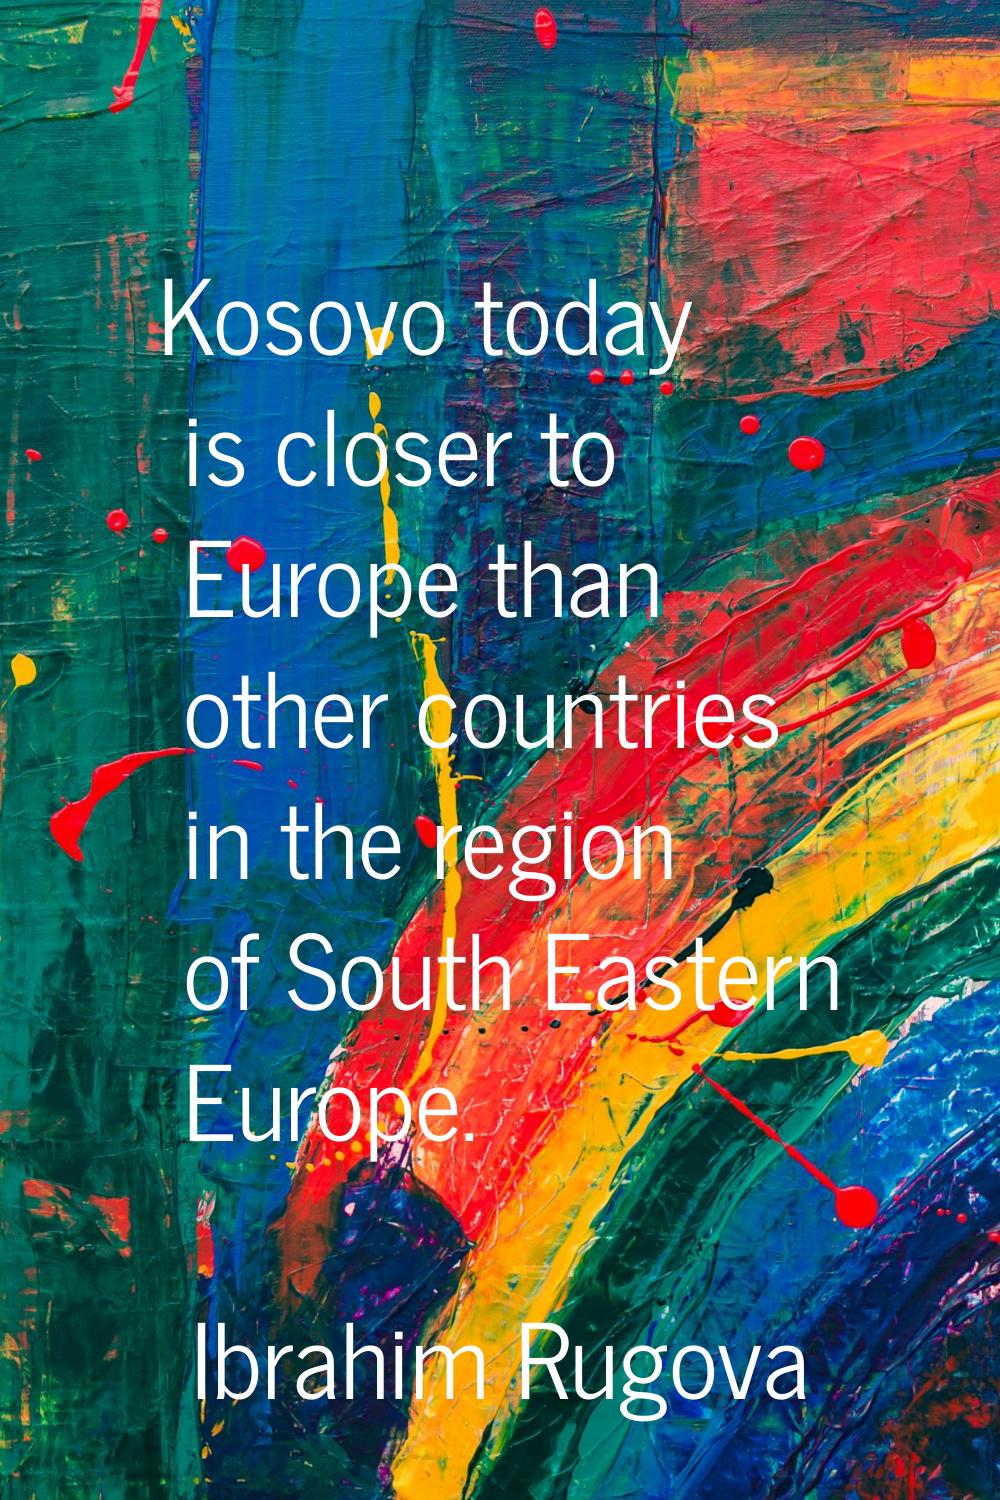 Kosovo today is closer to Europe than other countries in the region of South Eastern Europe.